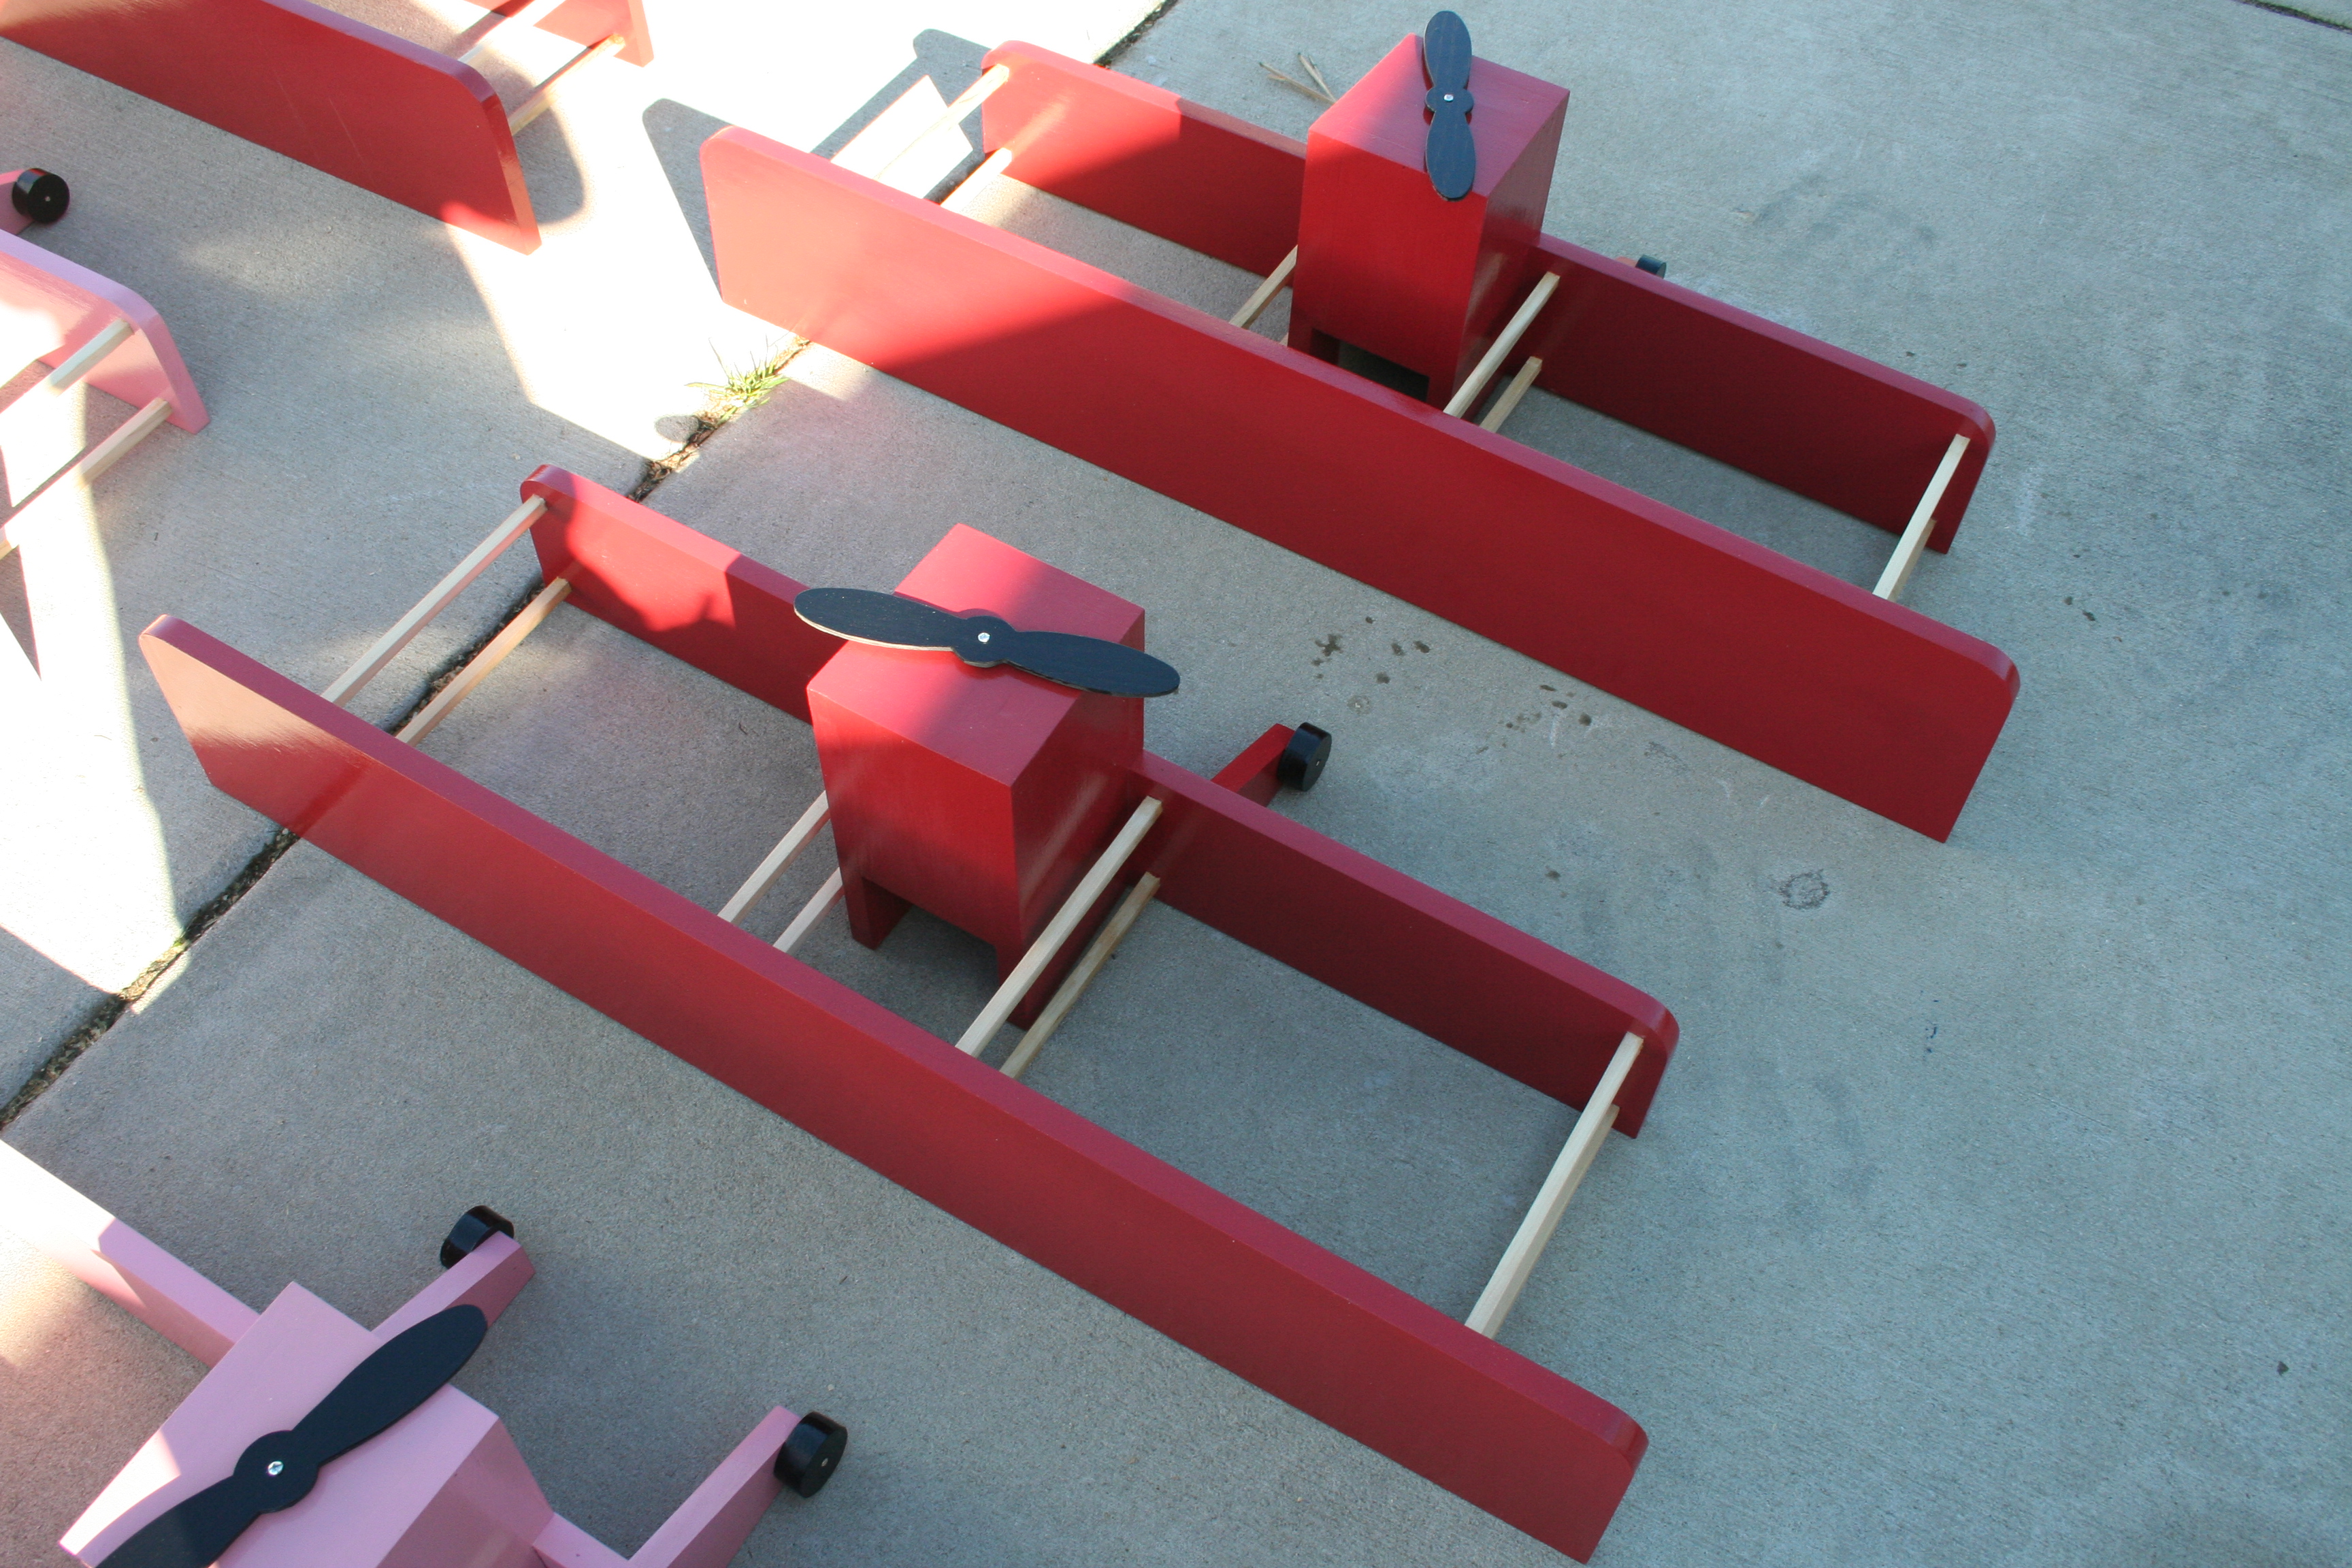 Biplane Shelves from the top